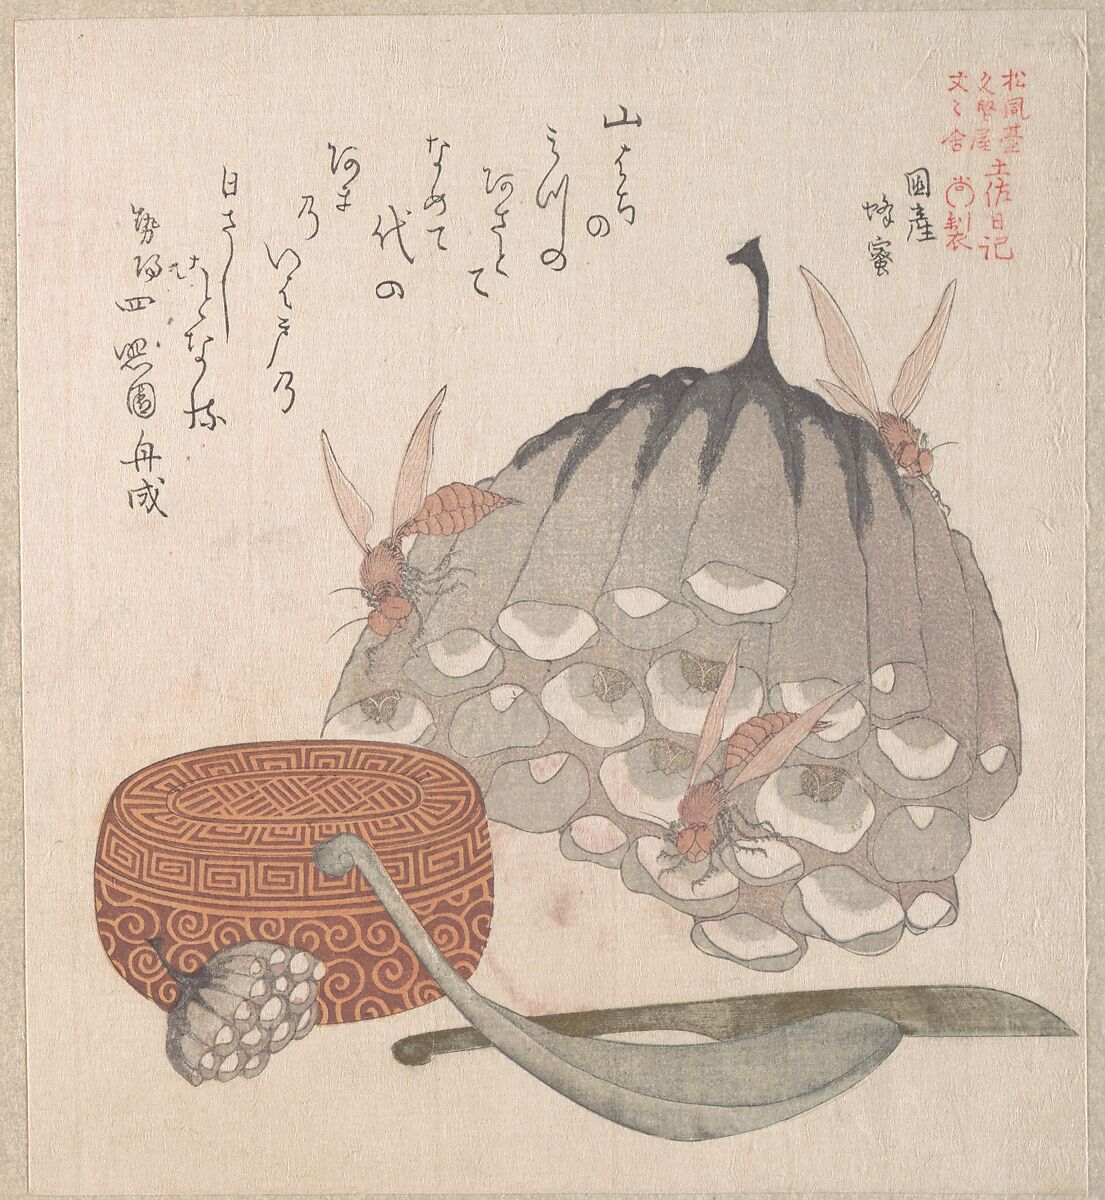 Hives with Wasps, and a Box with a Spoon for Honey, Kubo Shunman (Japanese, 1757–1820) (?), Woodblock print (surimono); ink and color on paper, Japan 